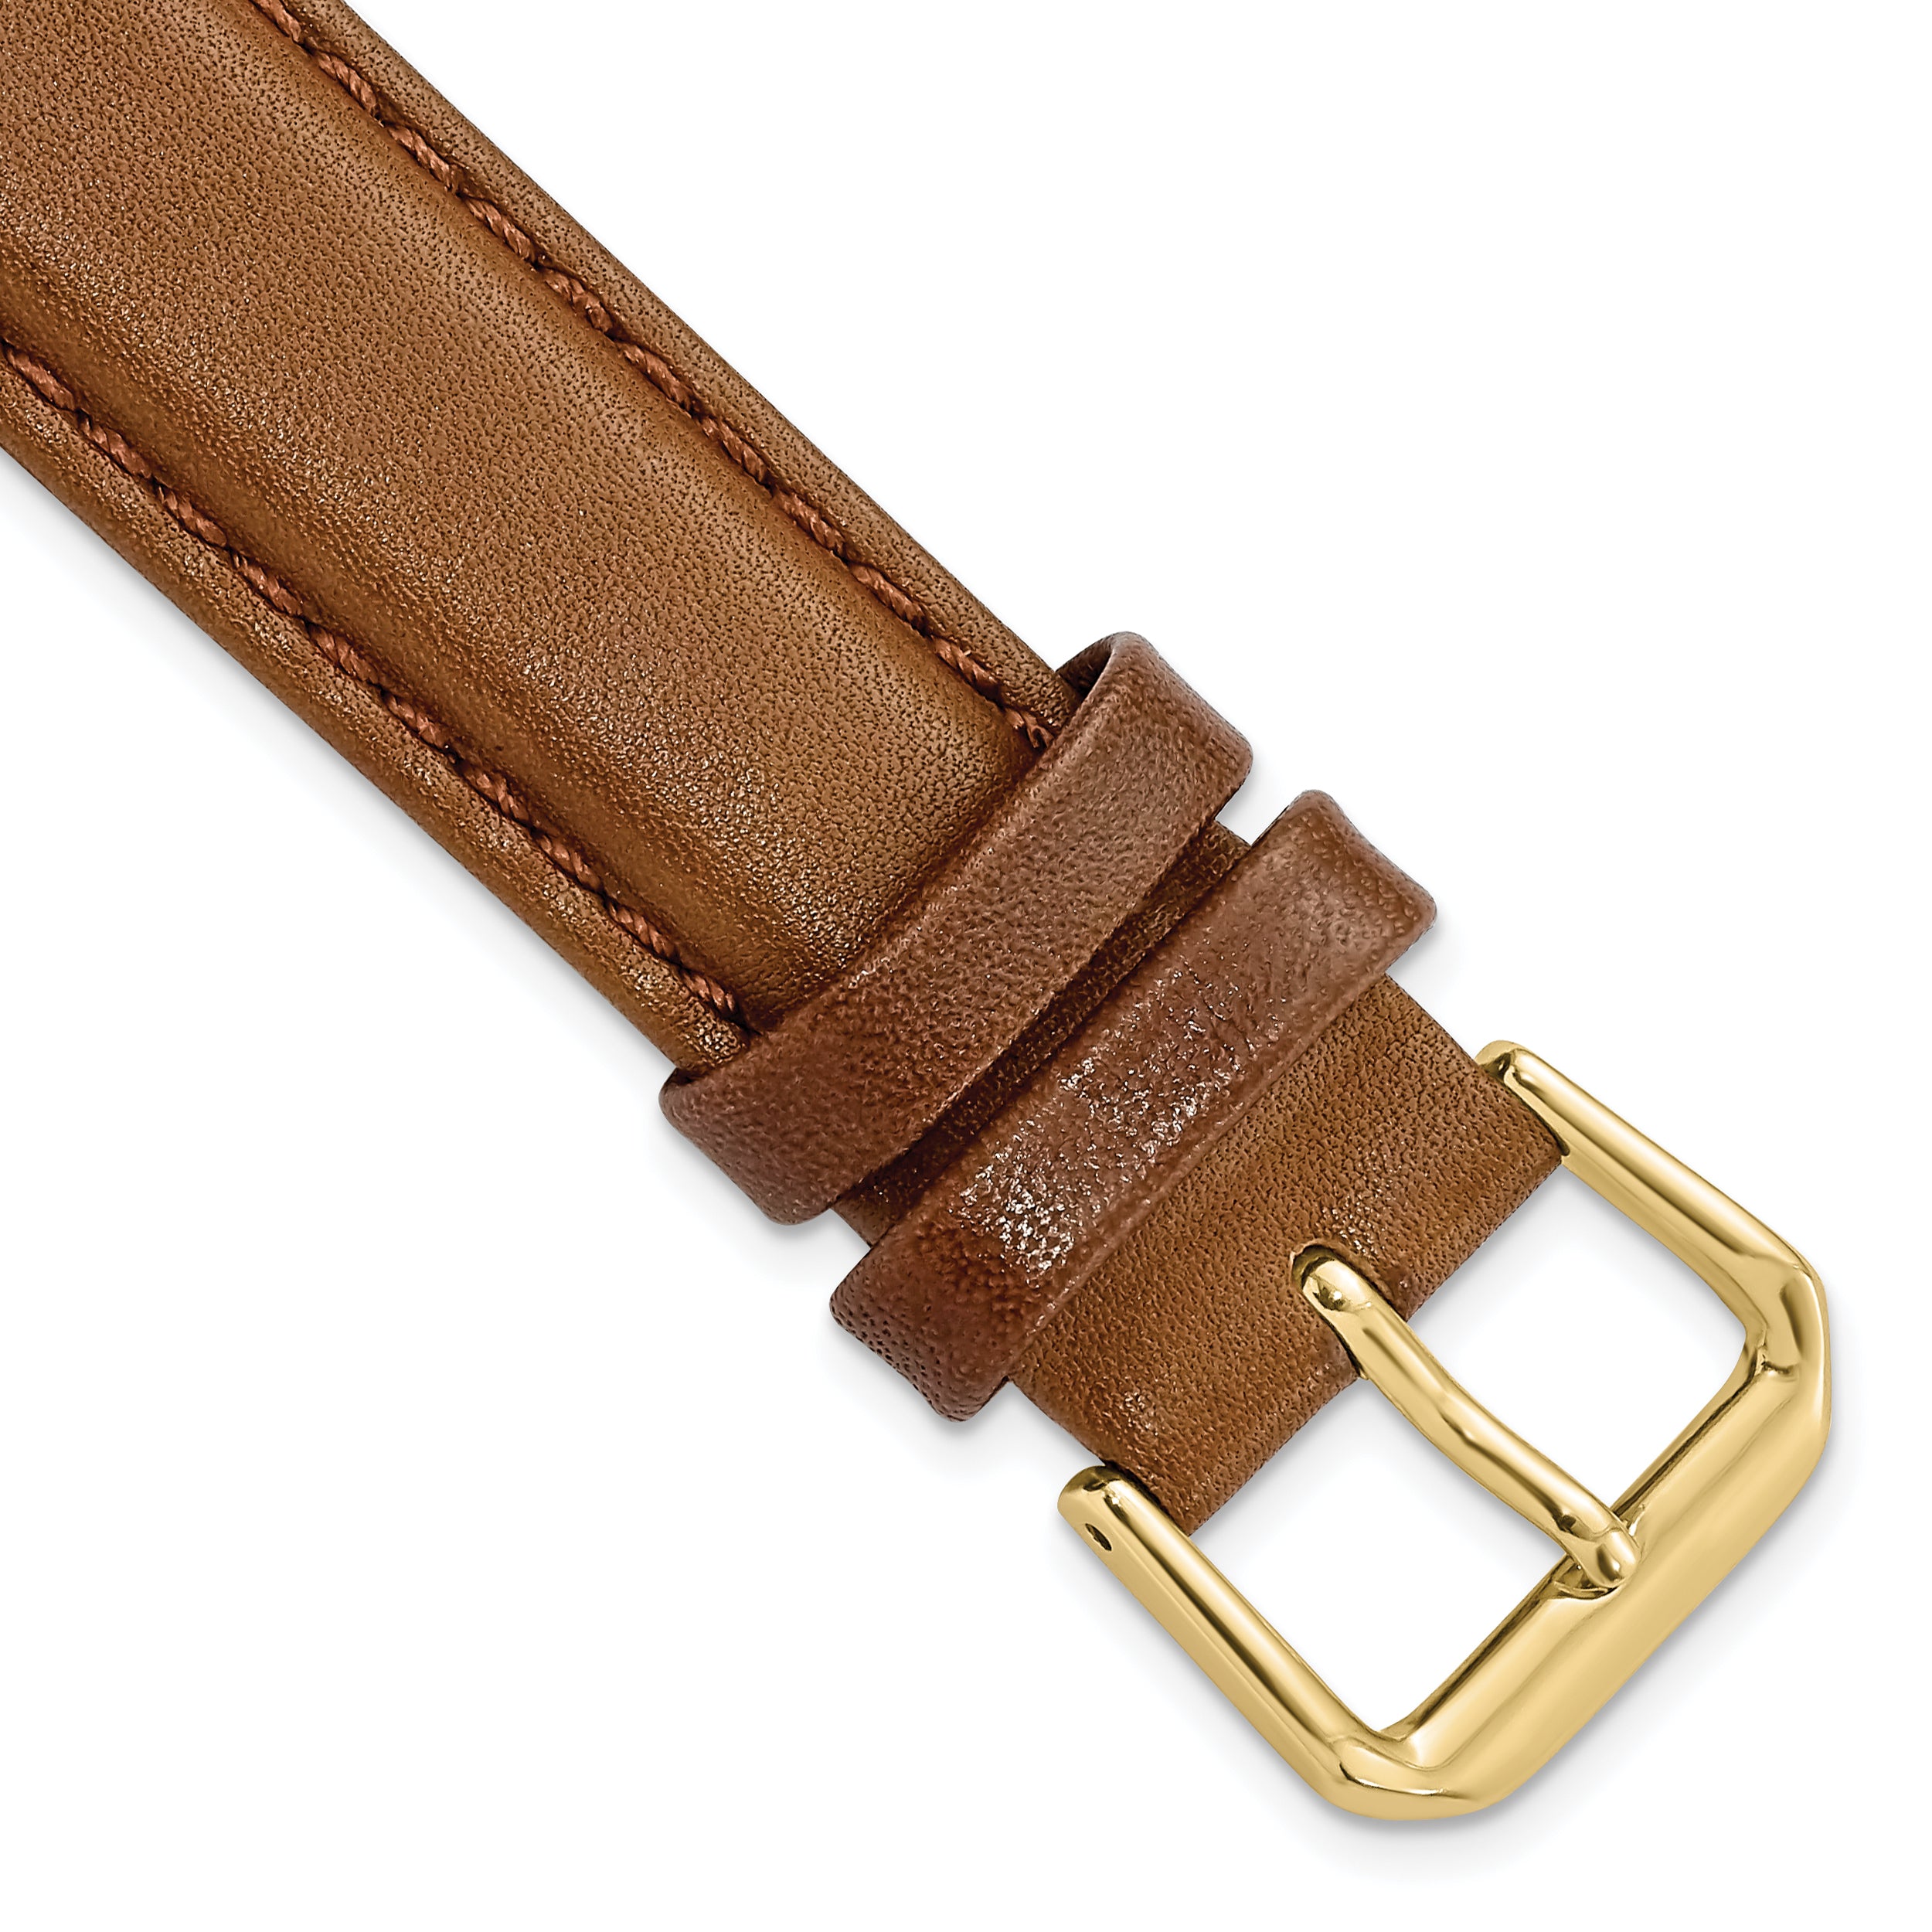 DeBeer 17mm Havana Smooth Leather with Gold-tone Buckle 7.5 inch Watch Band